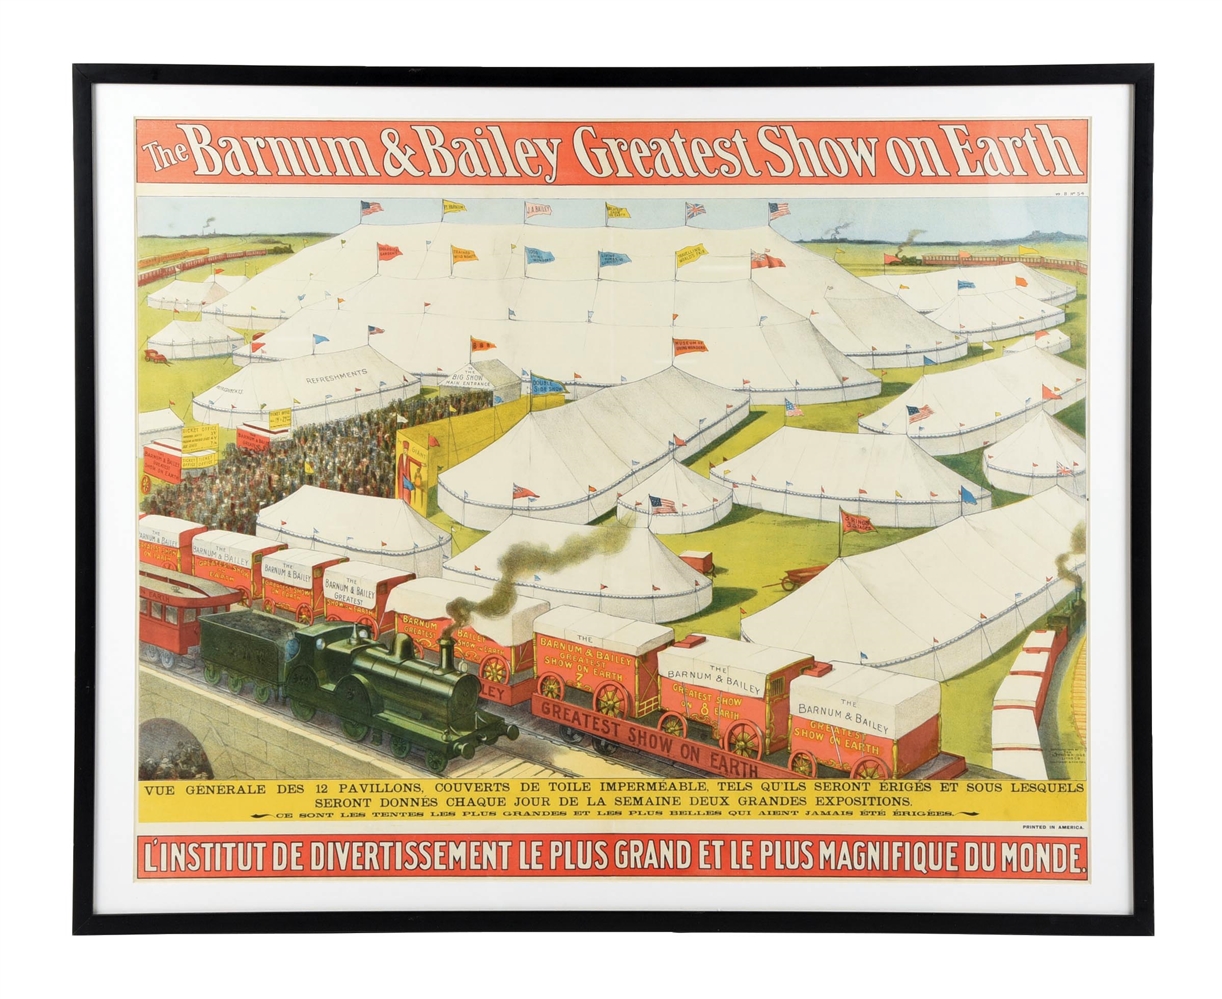 BARNUM & BAILEY "GREATEST SHOW ON EARTH" PAPER LITHOGRAPH CIRCUS POSTER W/ TRAIN GRAPHIC